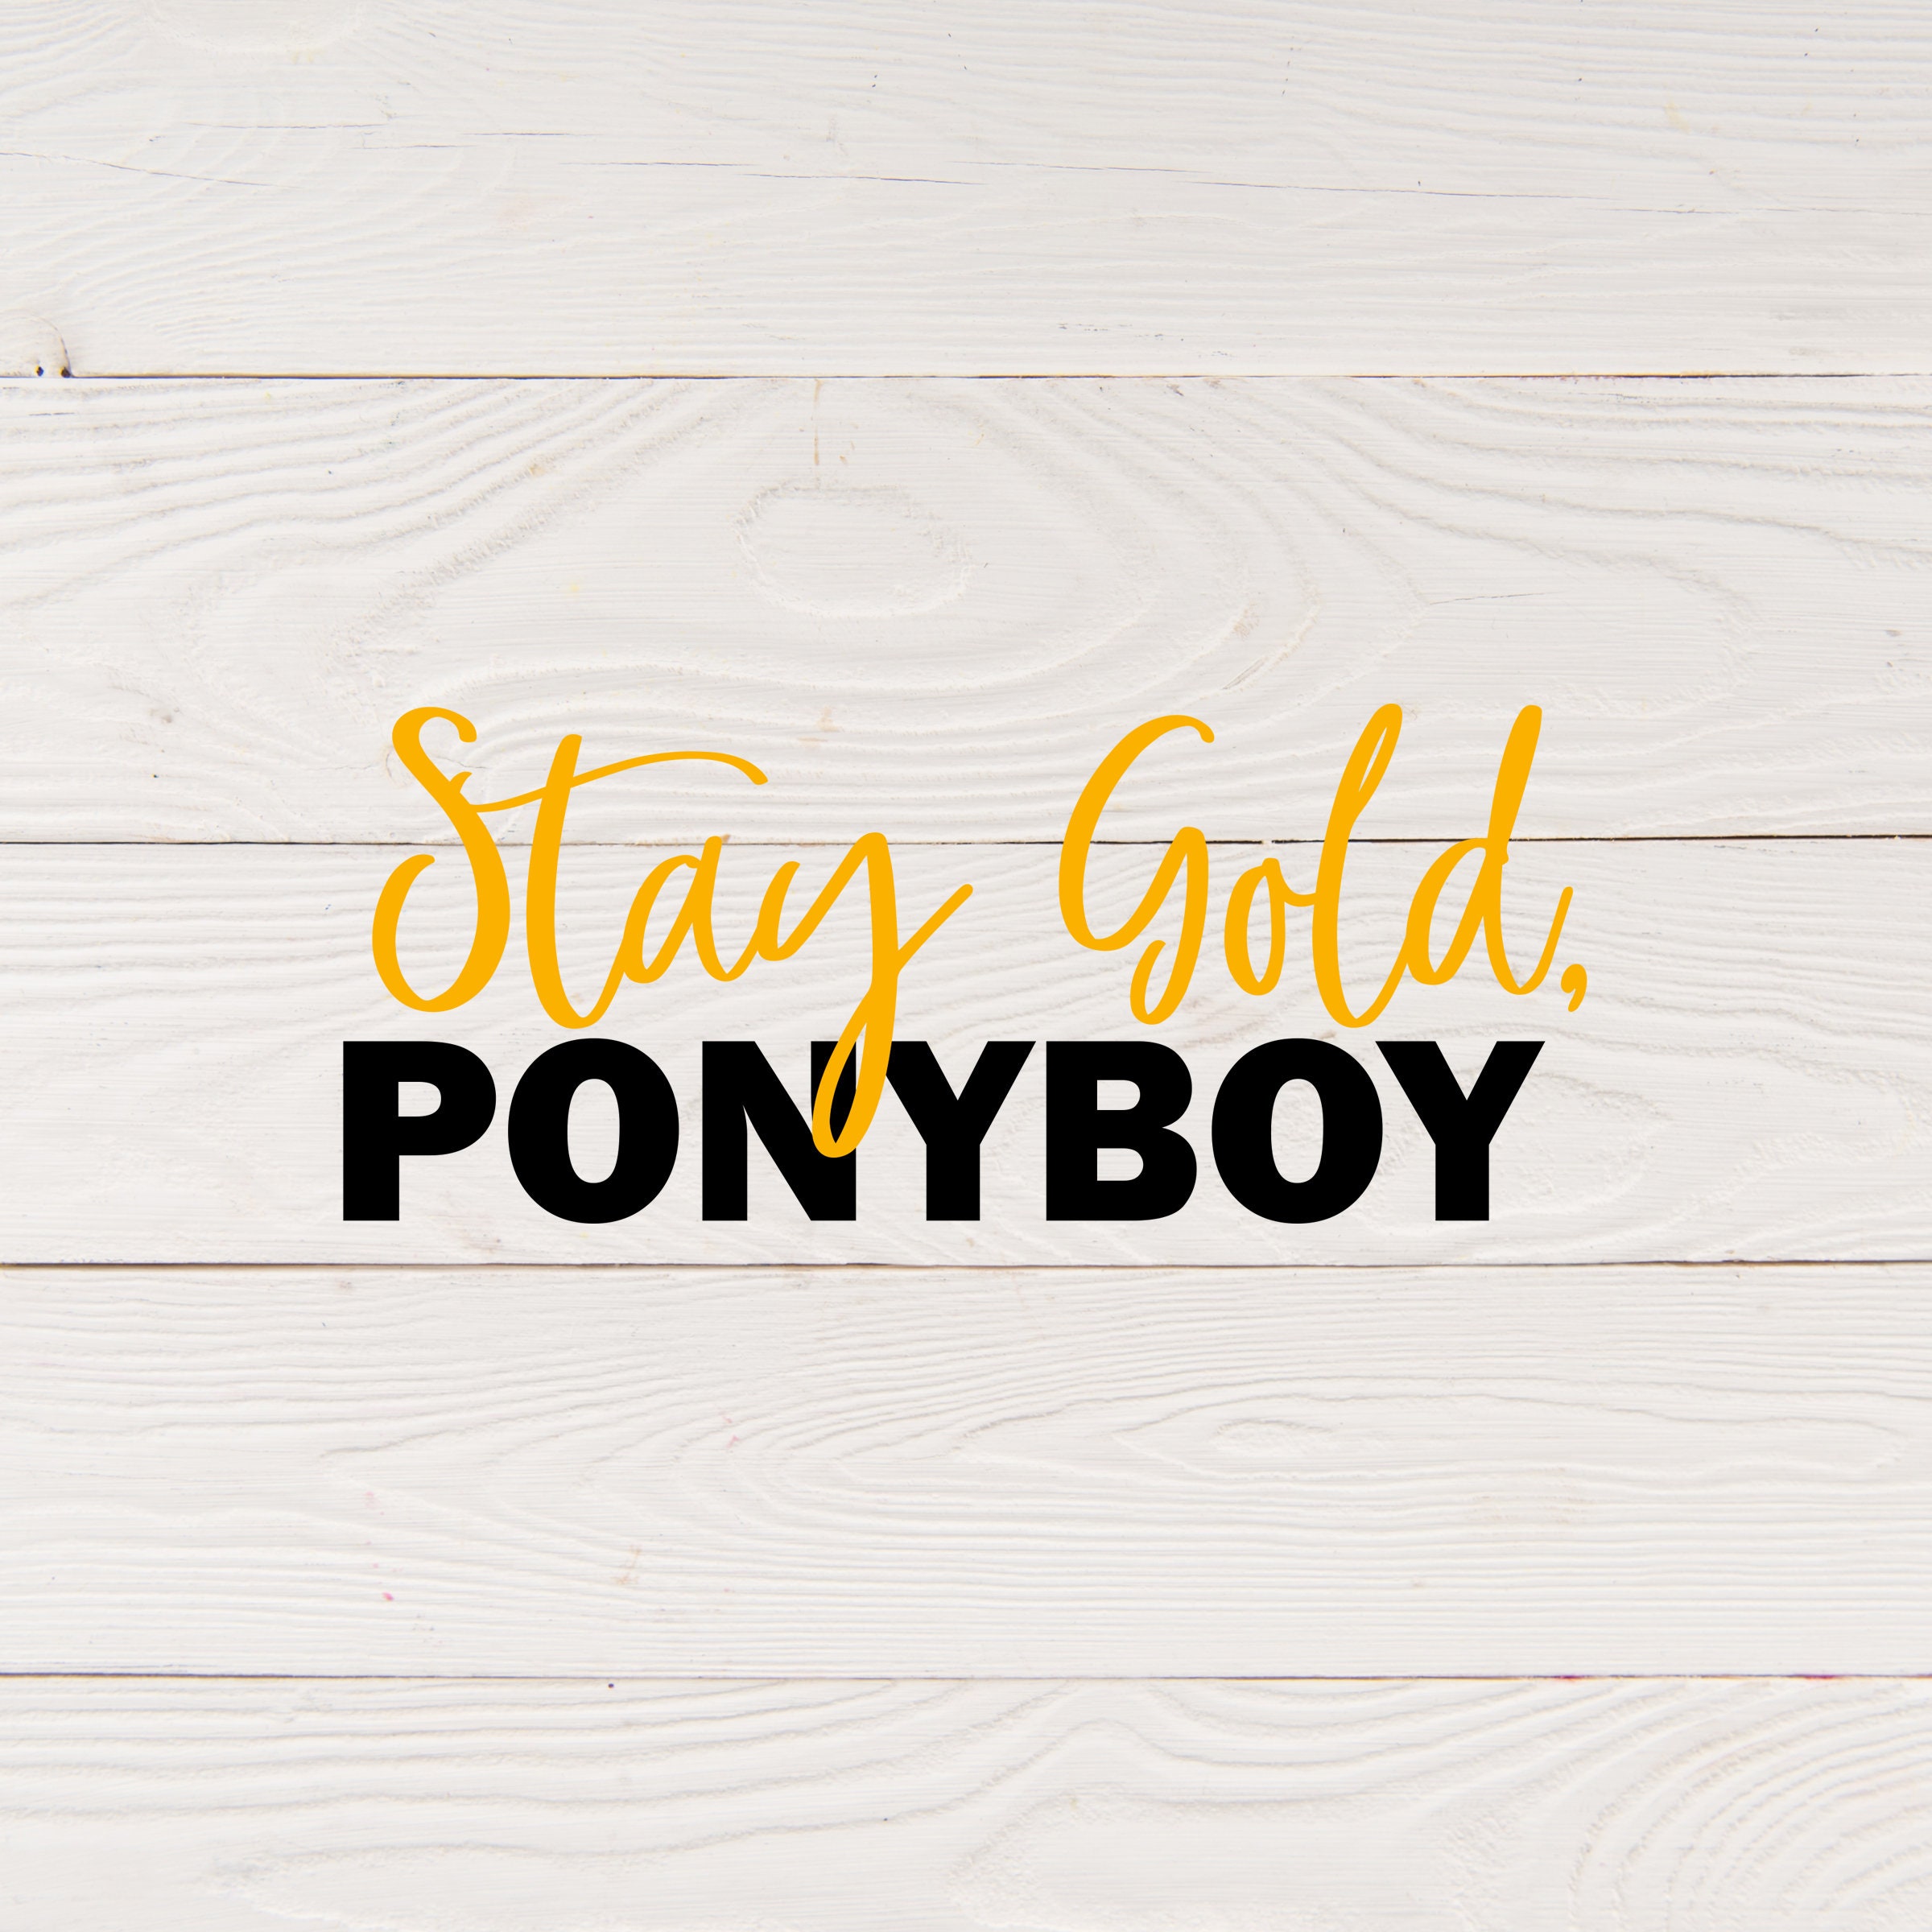 The Outsiders Quote Svg the Outsiders Movie Ponyboy image